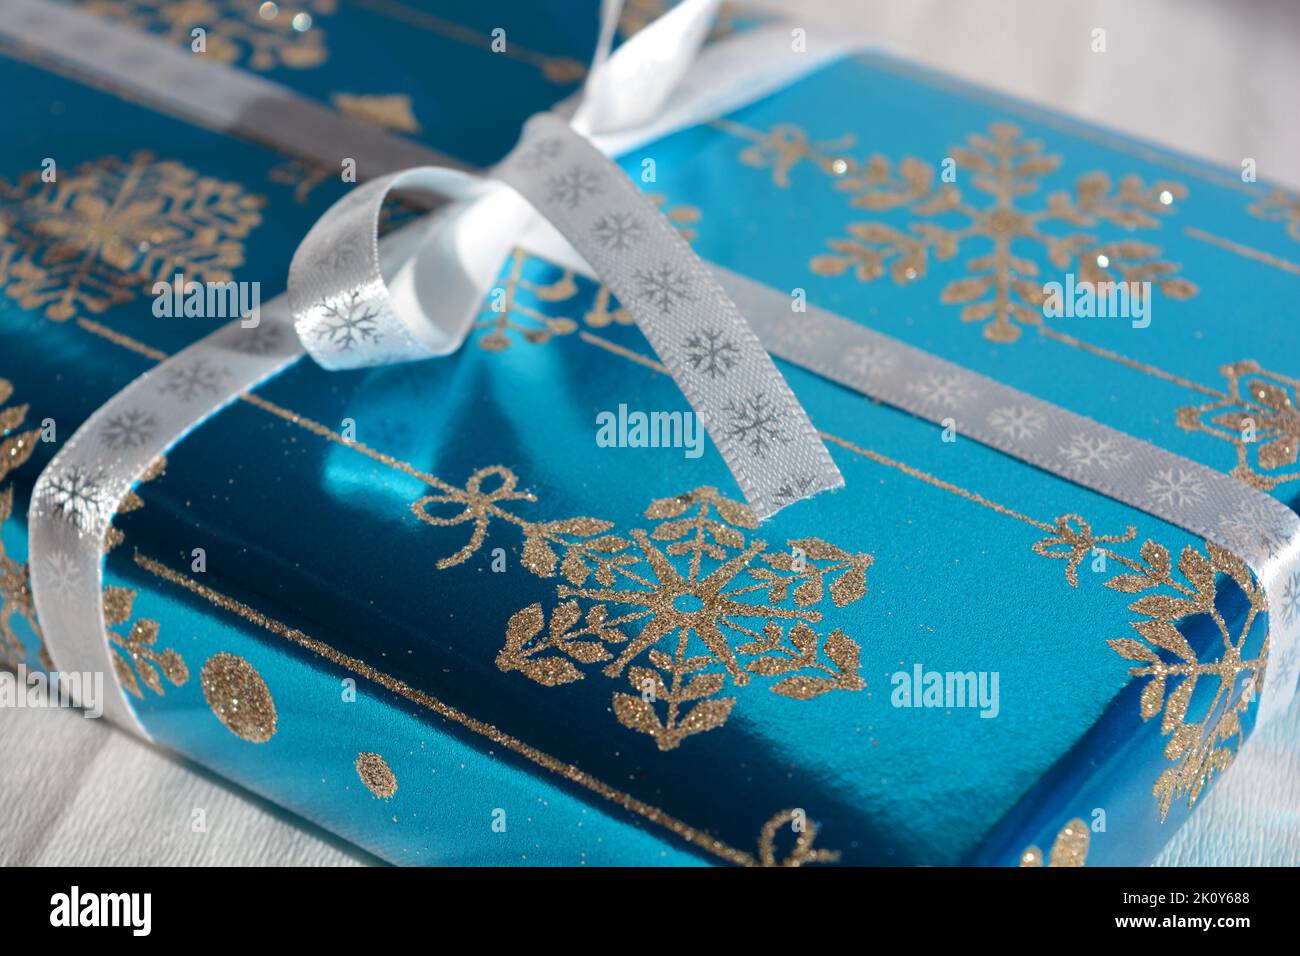 Beautifully wrapped snowflake themed turquoise Christmas present decorated with a white bow on a plain white background Stock Photo